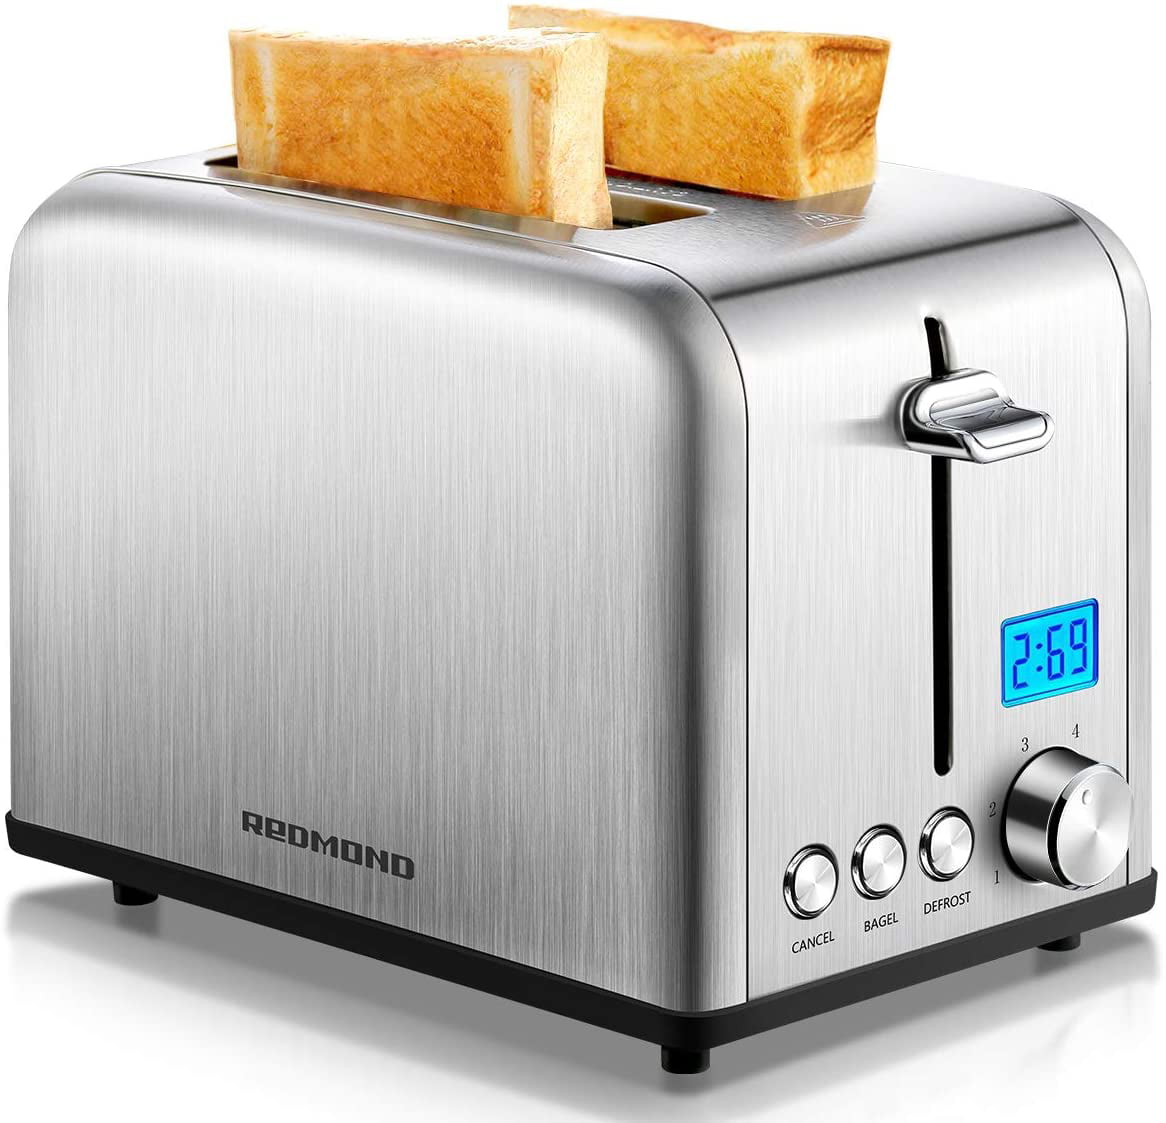 HOLIFE Stainless Steel Toaster LCD Timer Display Bagel Toasters 2 Slice Toaster 